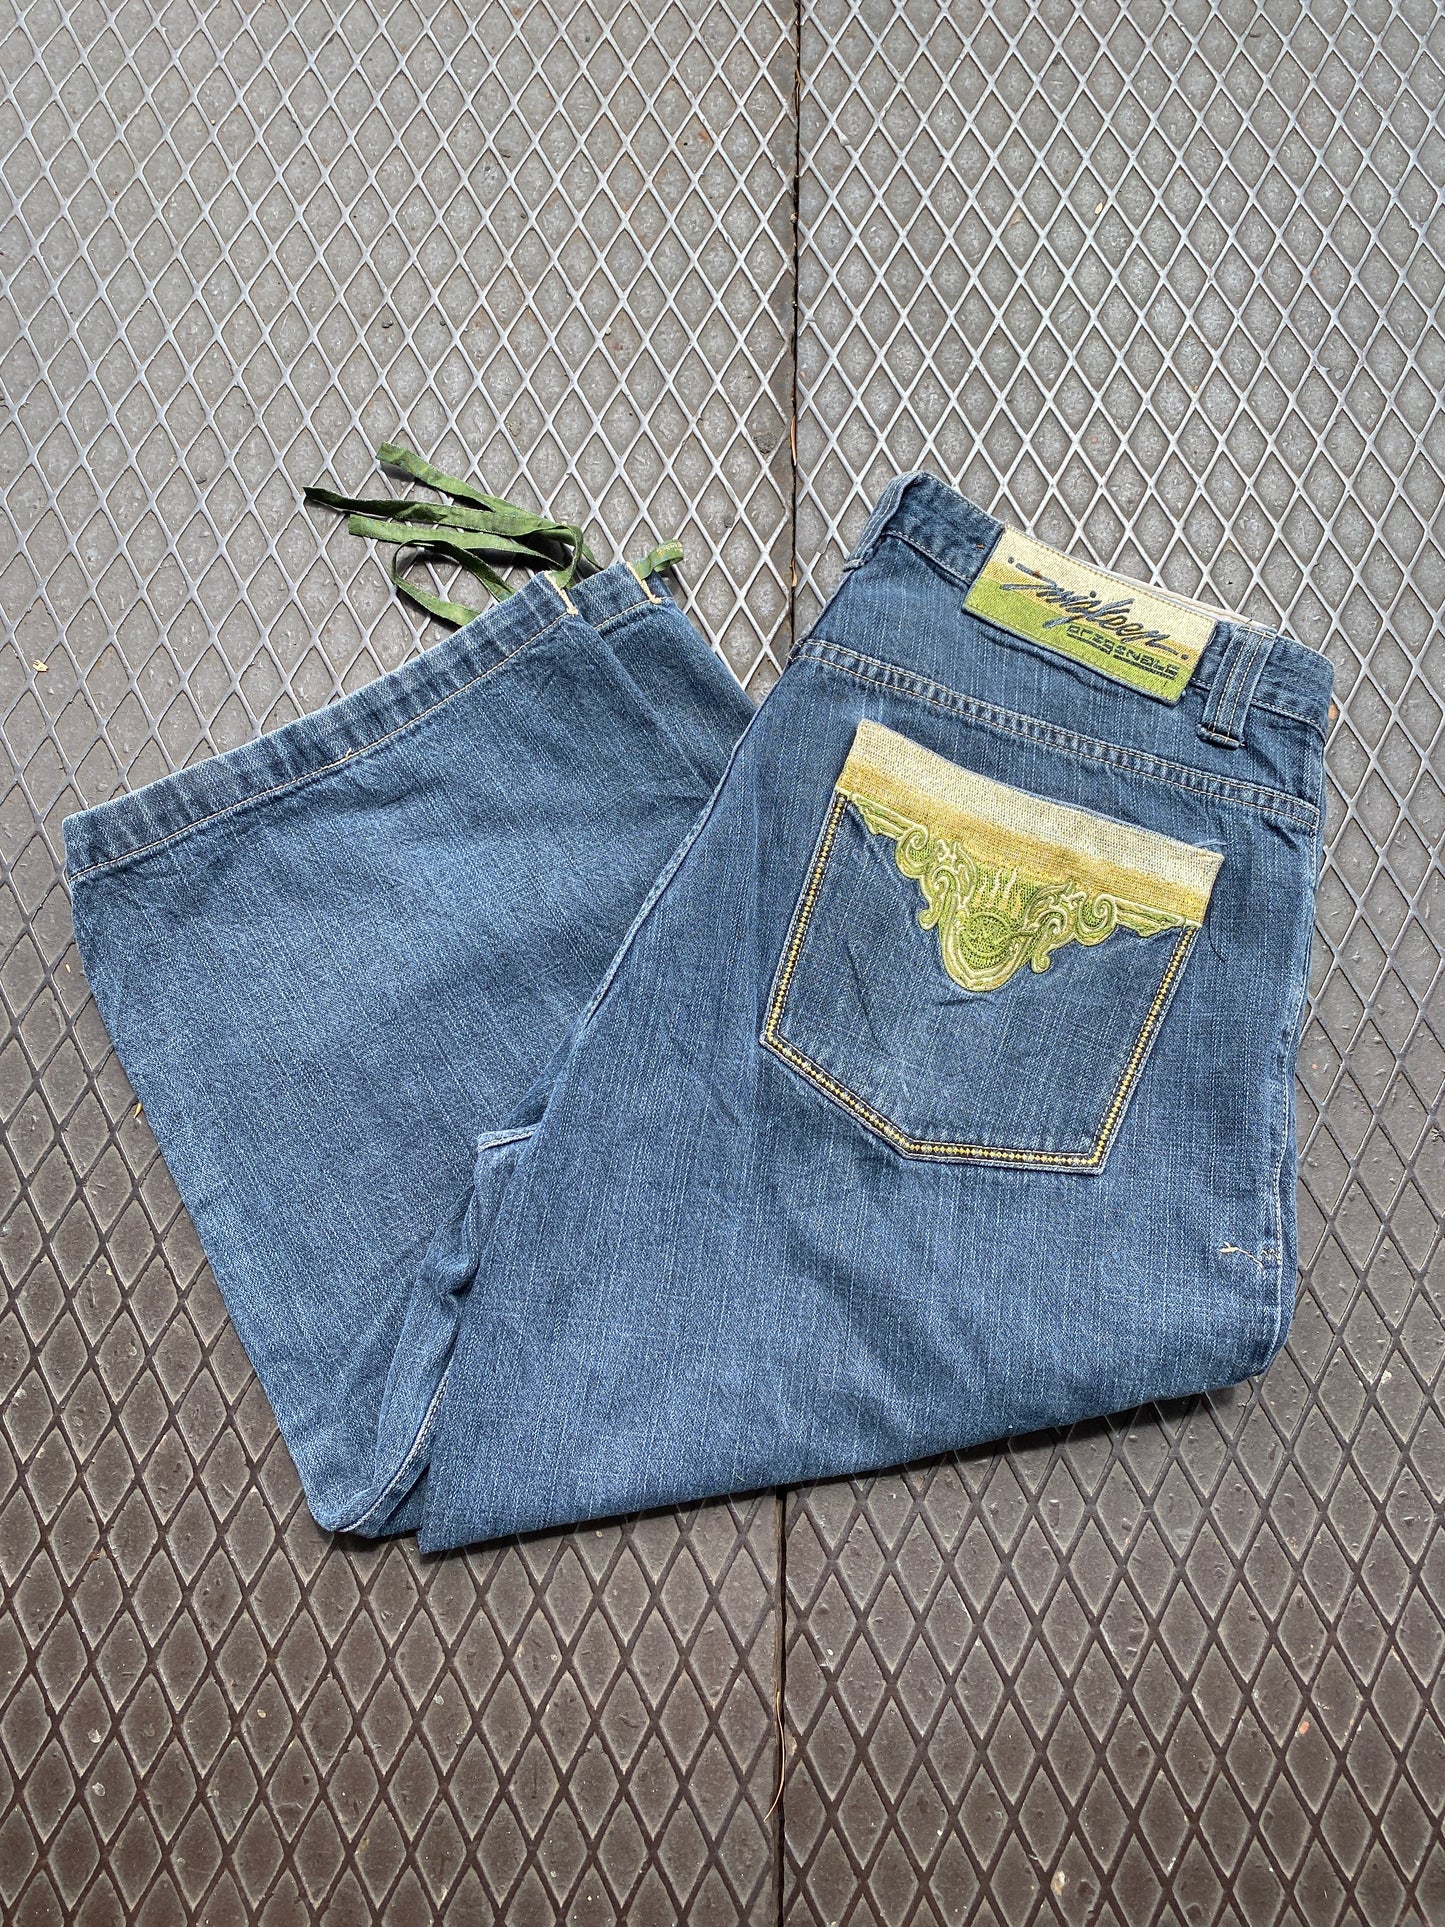 36 - Miskeen Green and Gold Embroidered Denim Shorts